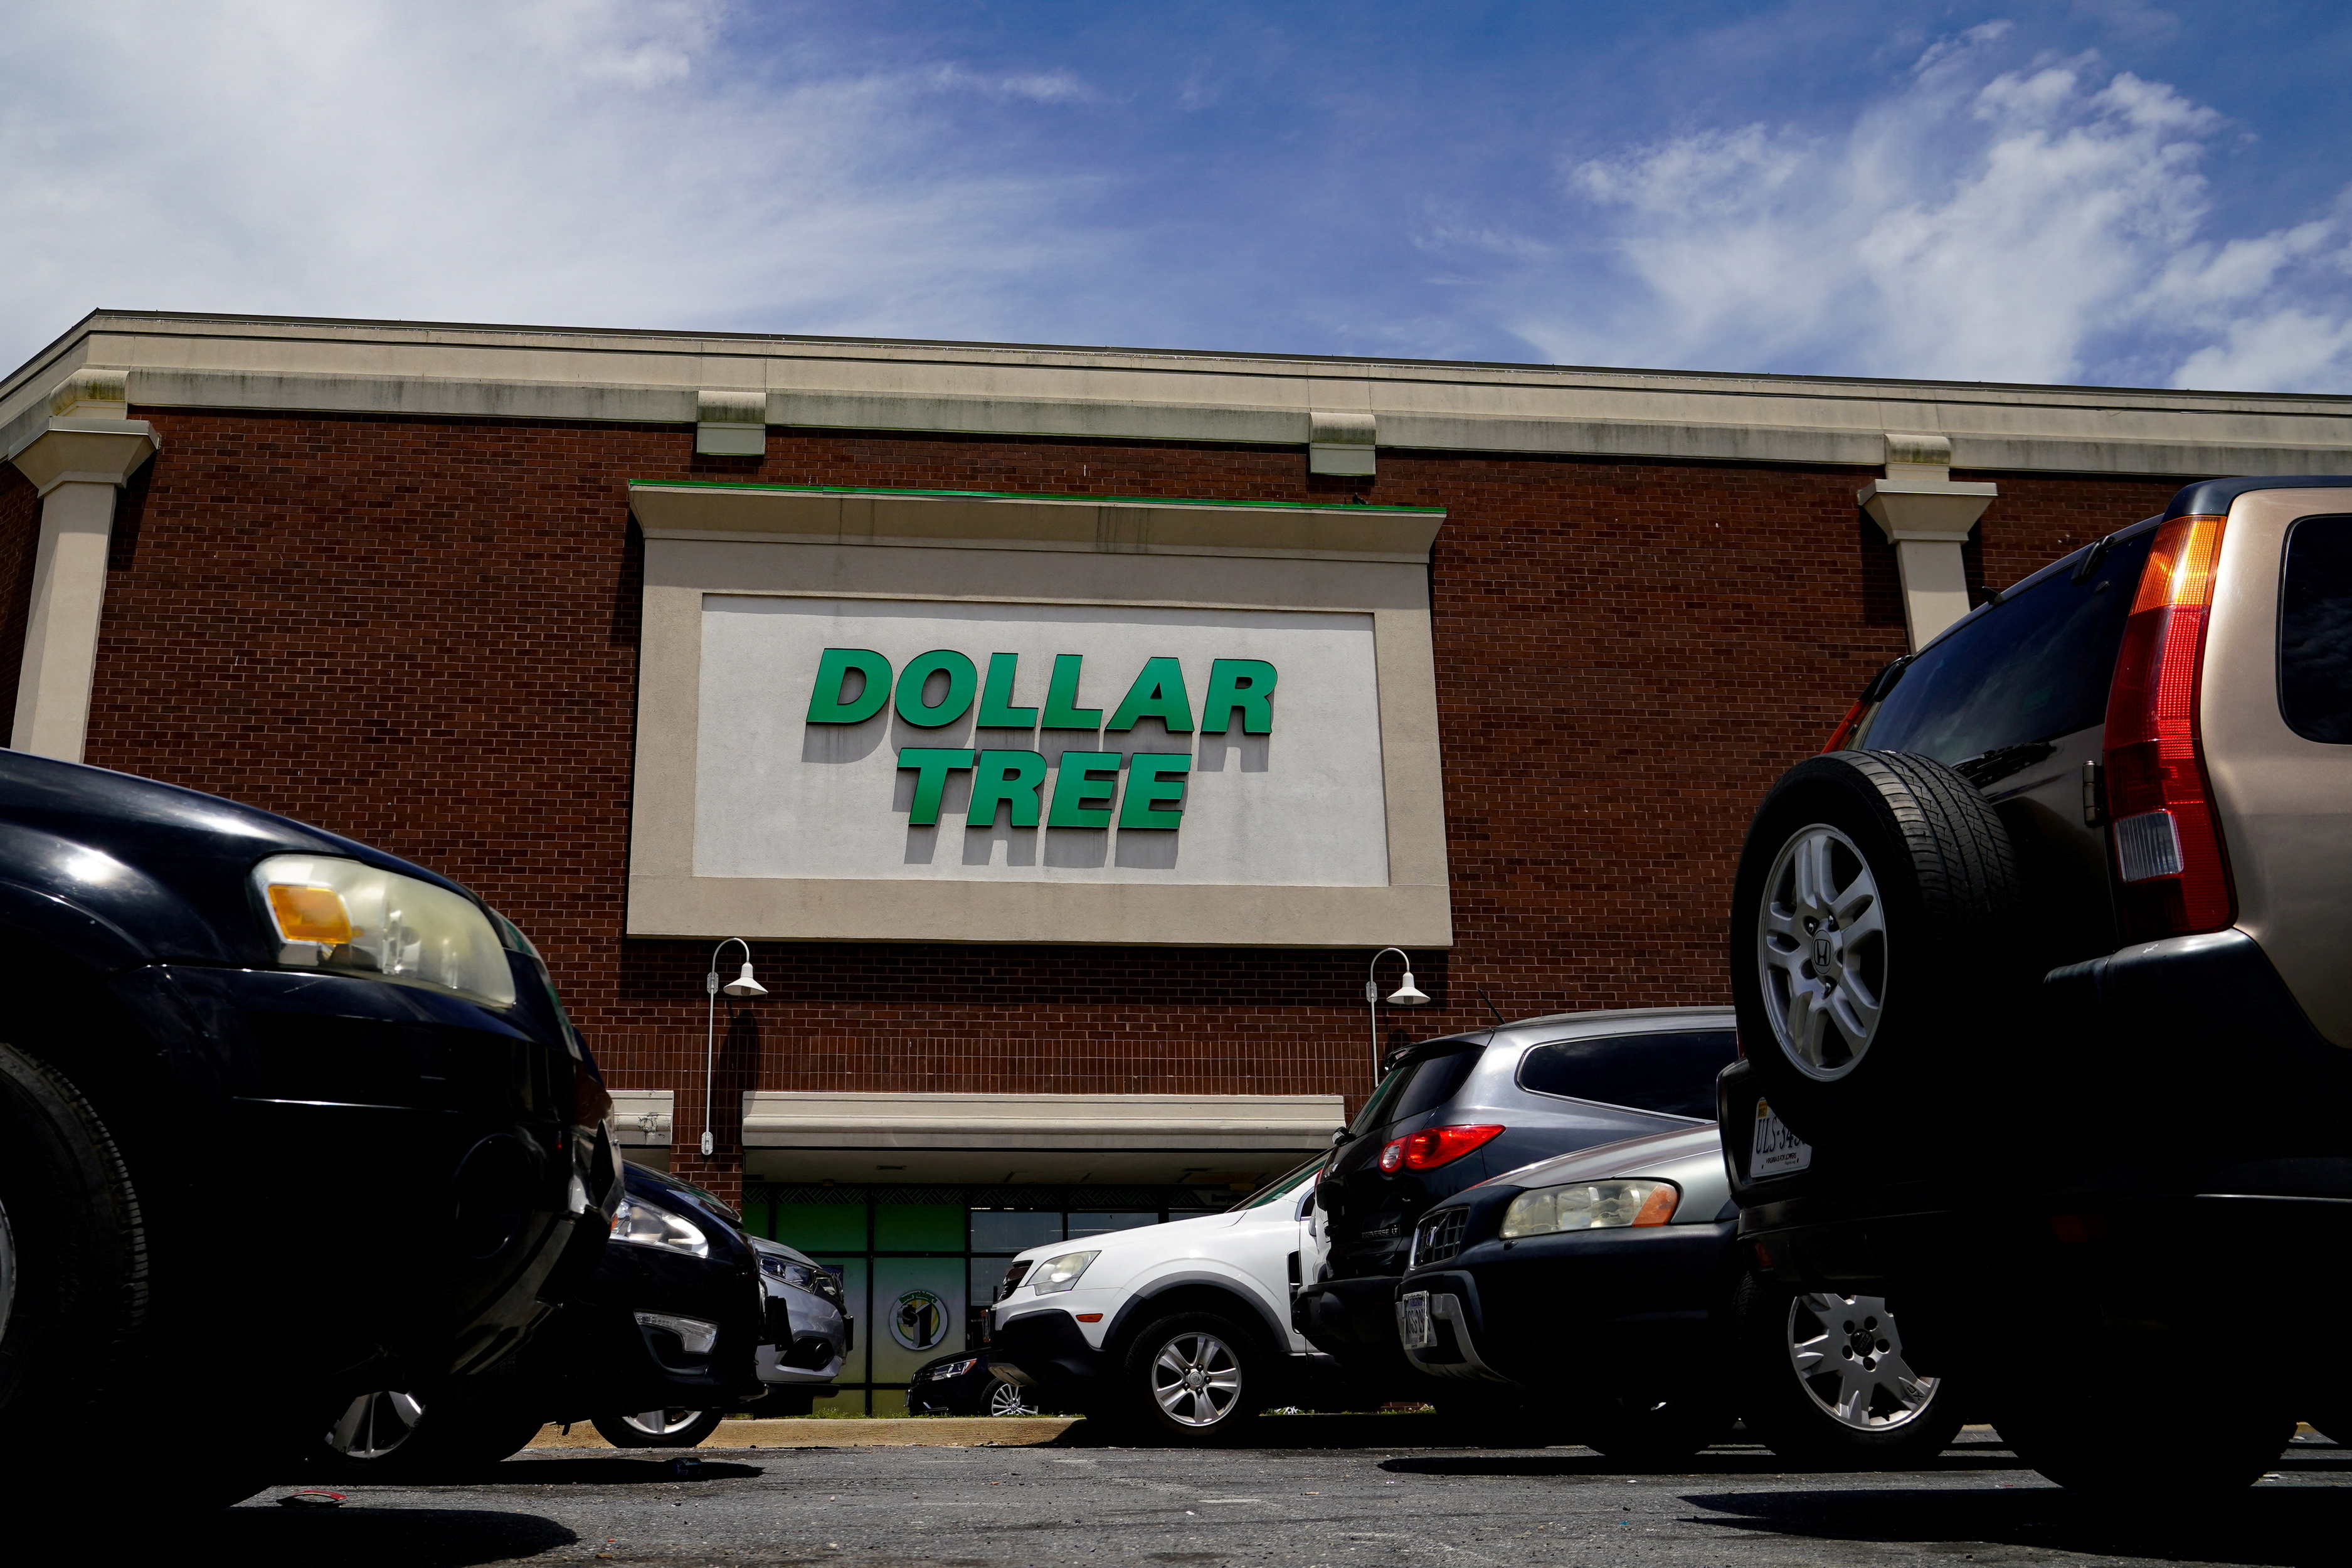 A view of a Dollar Tree store in Washington